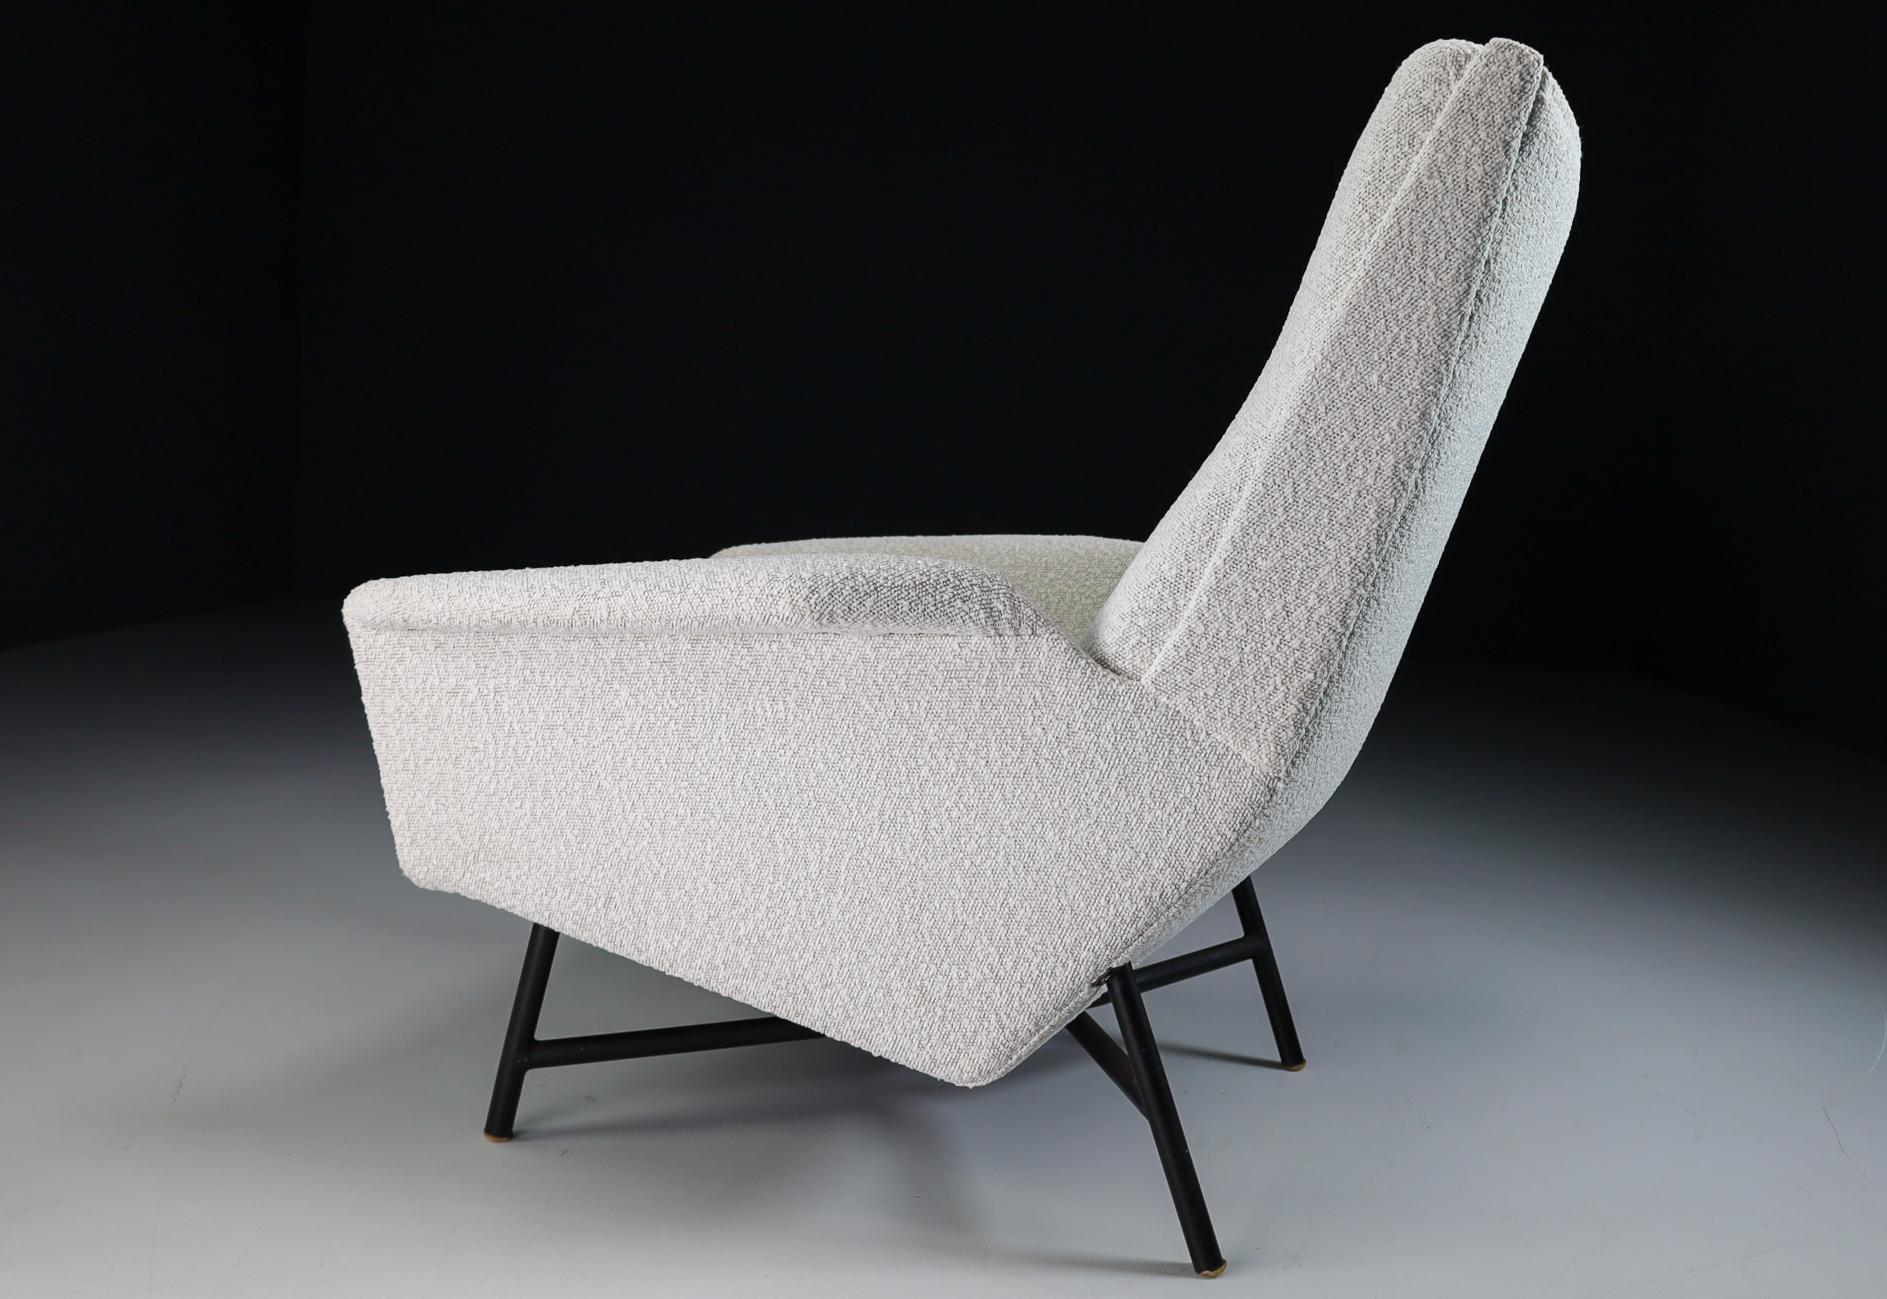 Midcentury Modern Lounge Chair in Re Upholstered Boucle Wool by Guy Besnard 1959 In Good Condition For Sale In Almelo, NL